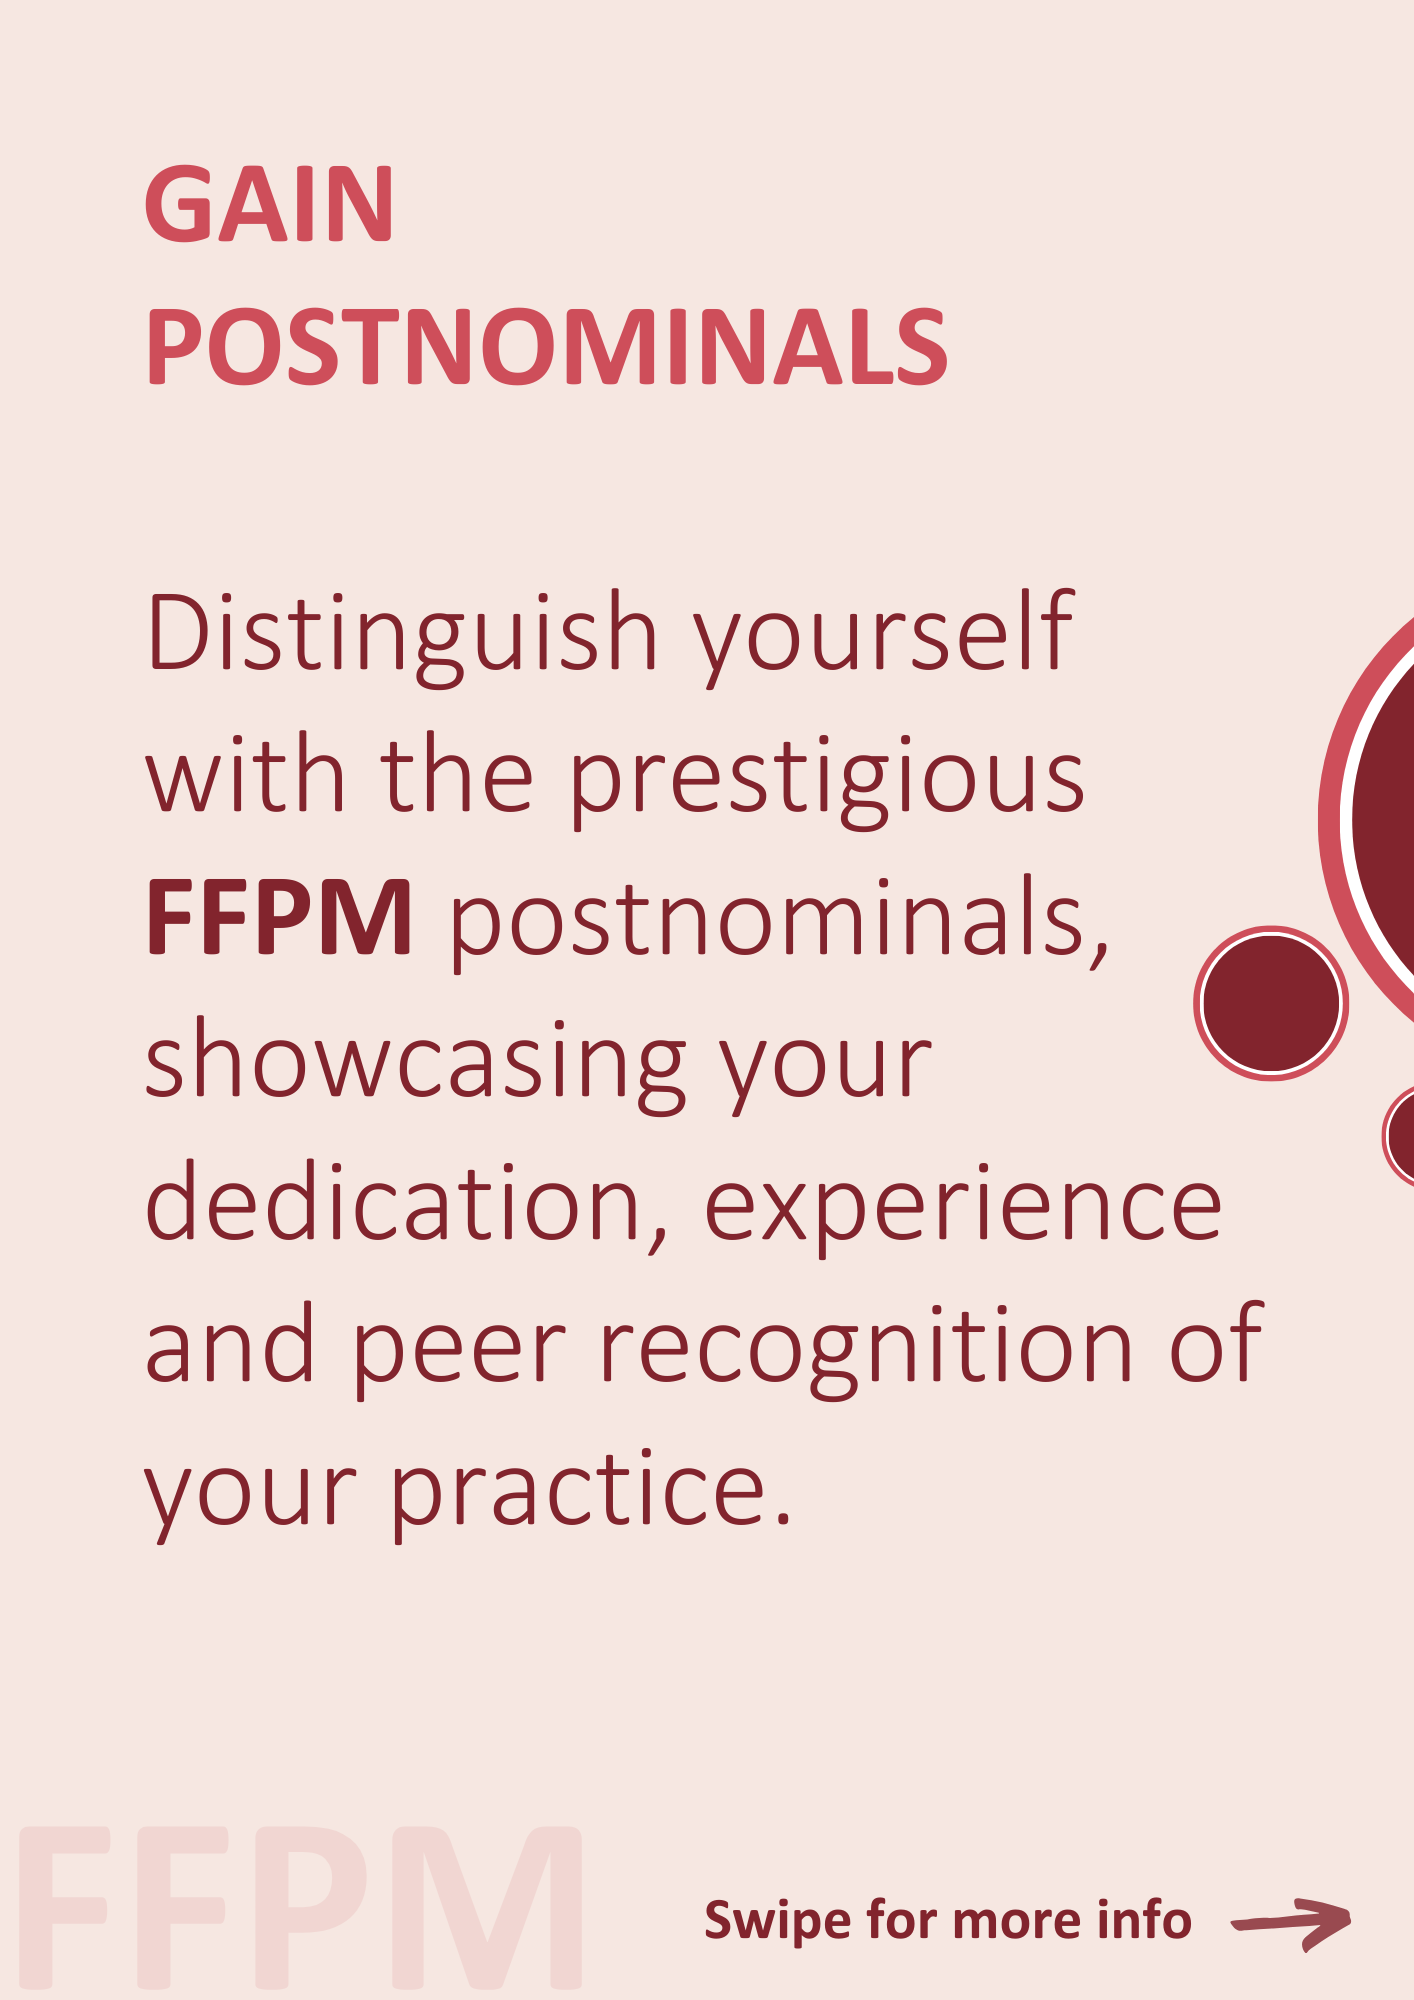 Gain Postnominals. Distinguish yourself with the prestigious FFPM postnominals, showcasing your dedication, experience and peer recognition of your practice.